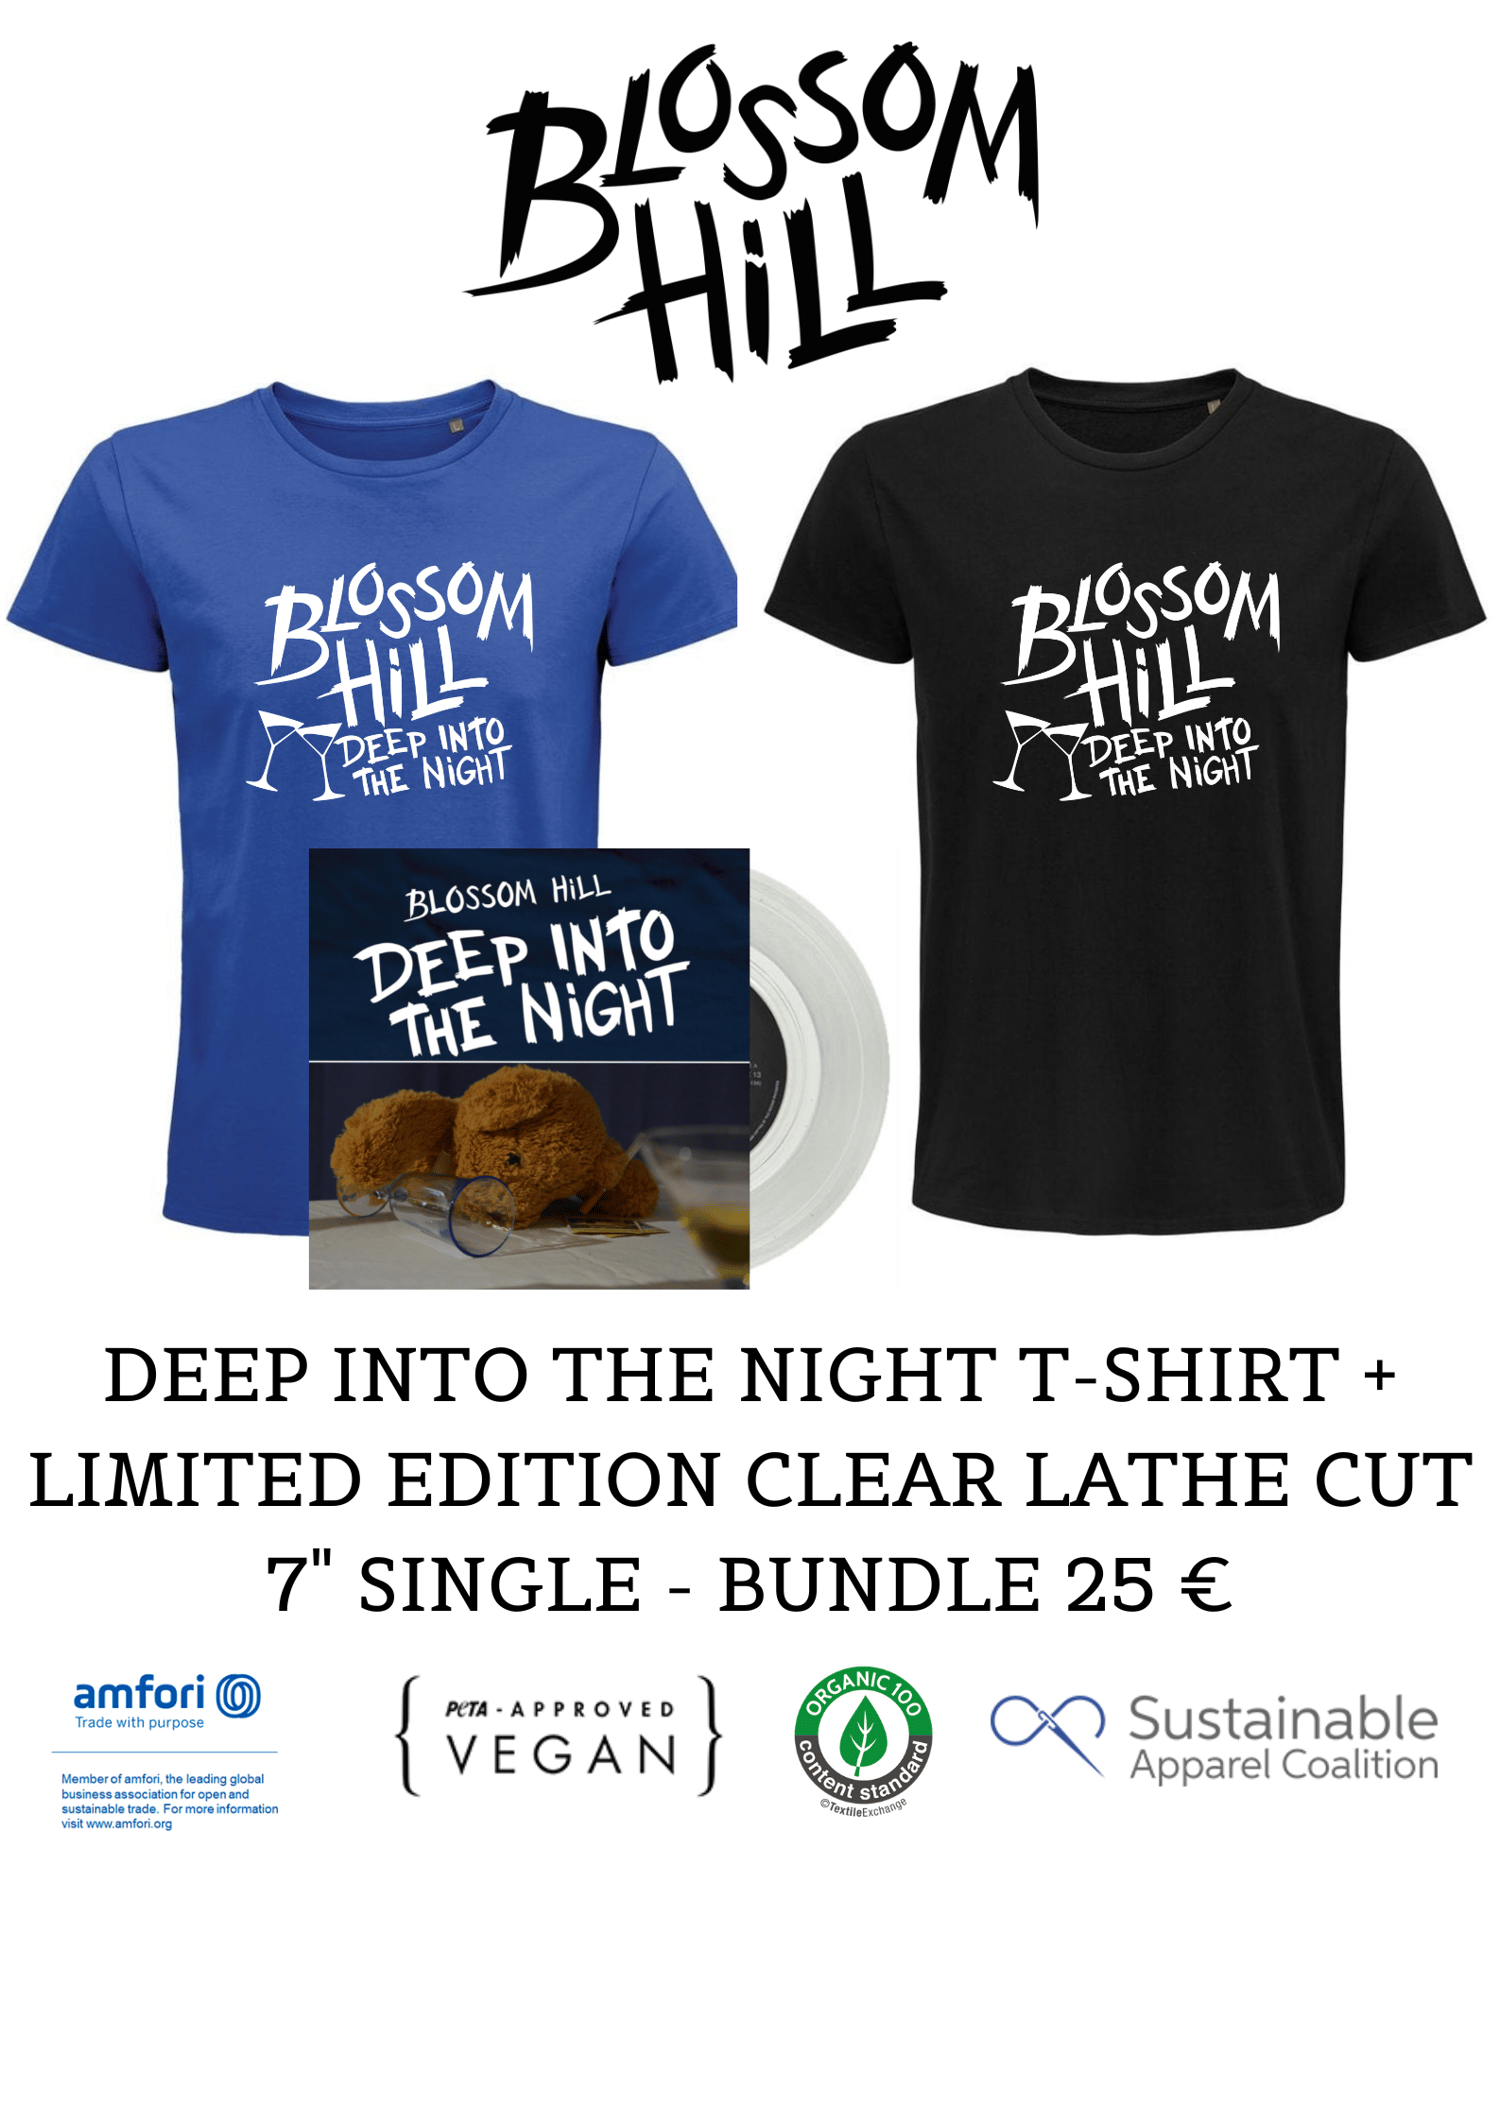 BLOSSOM HILL - DEEP INTO THE NIGHT T-SHIRT + LIMITED EDITION CLEAR LATHE CUT 7" SINGLE